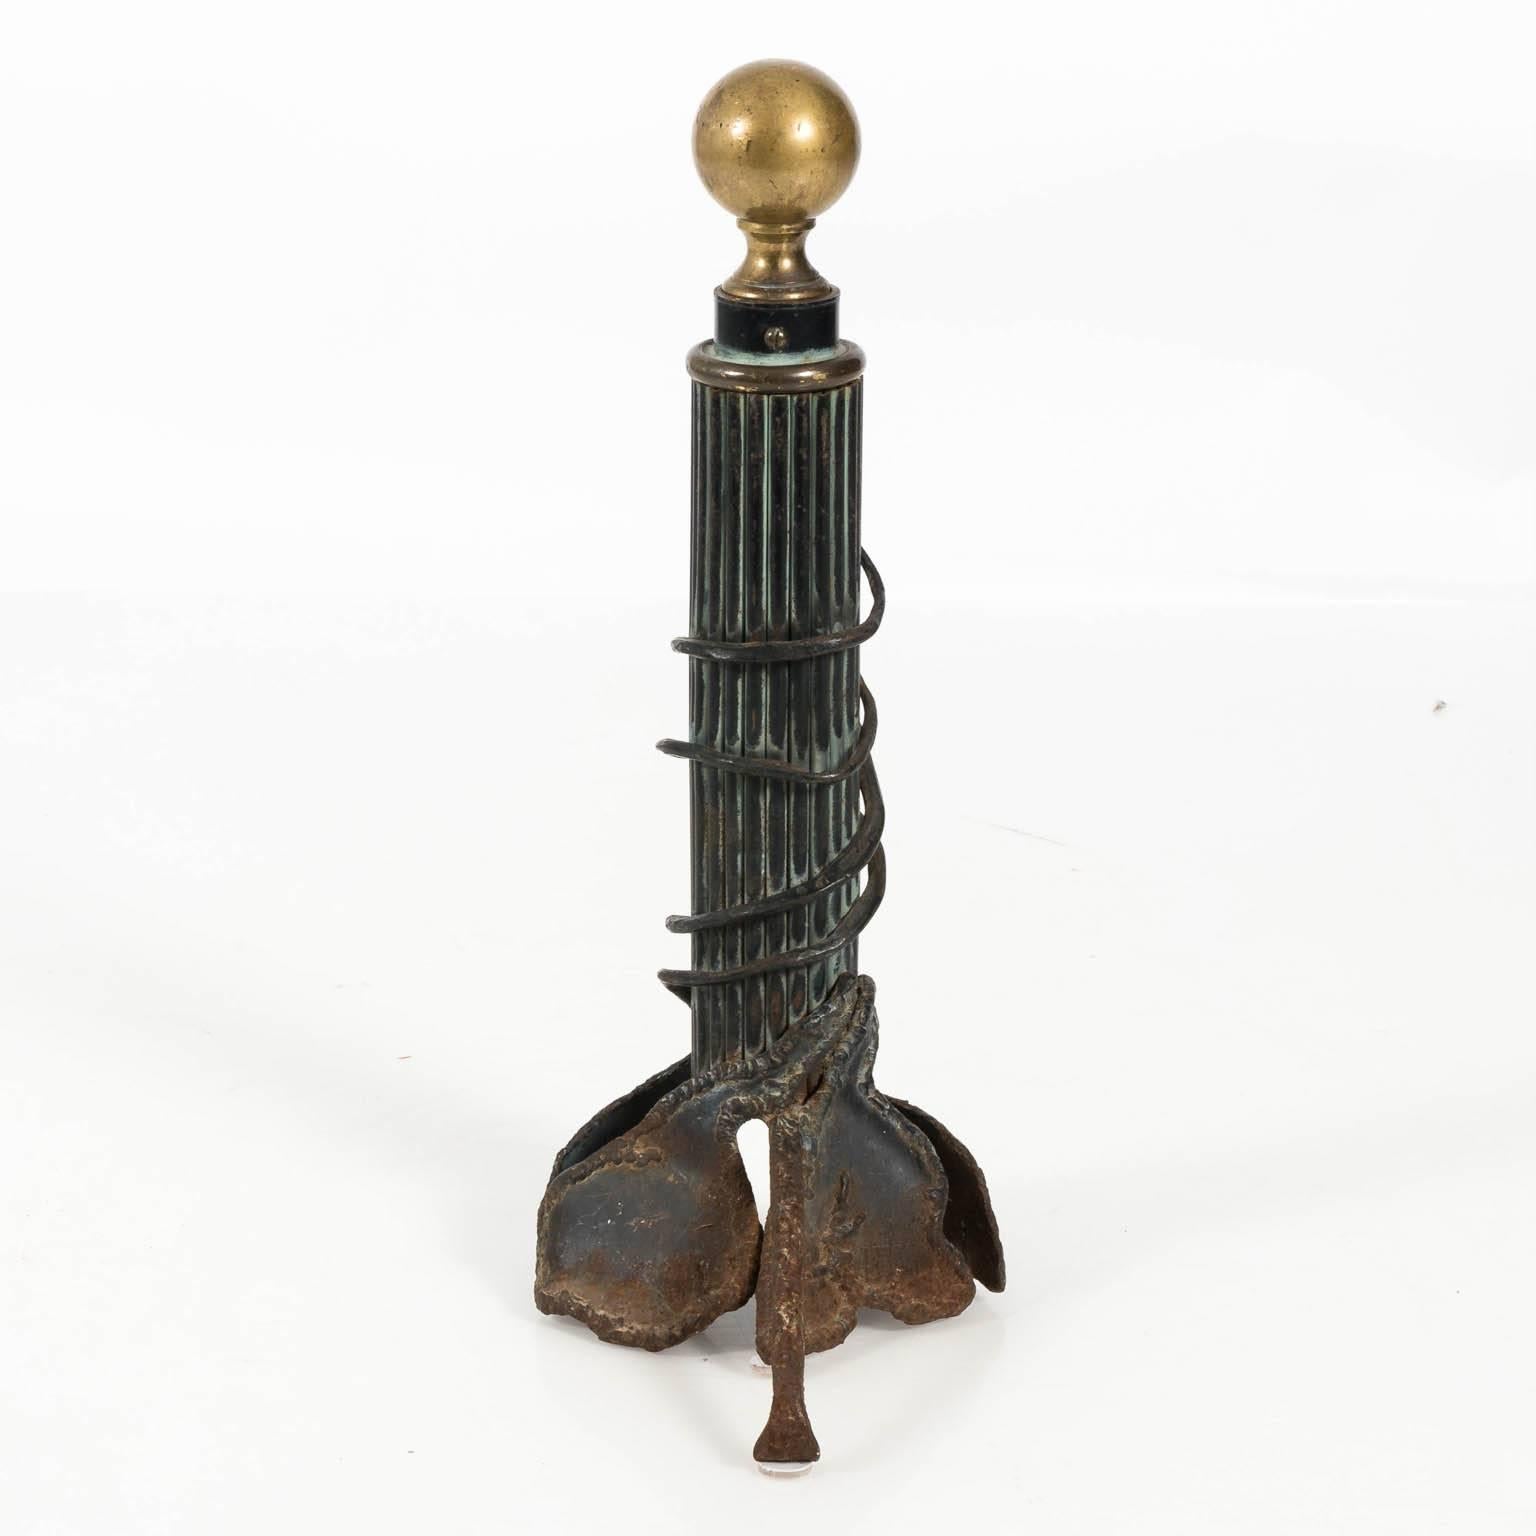 Pair of artist made andirons with brass ball finials and a fluted iron column body, circa 20th century.
    